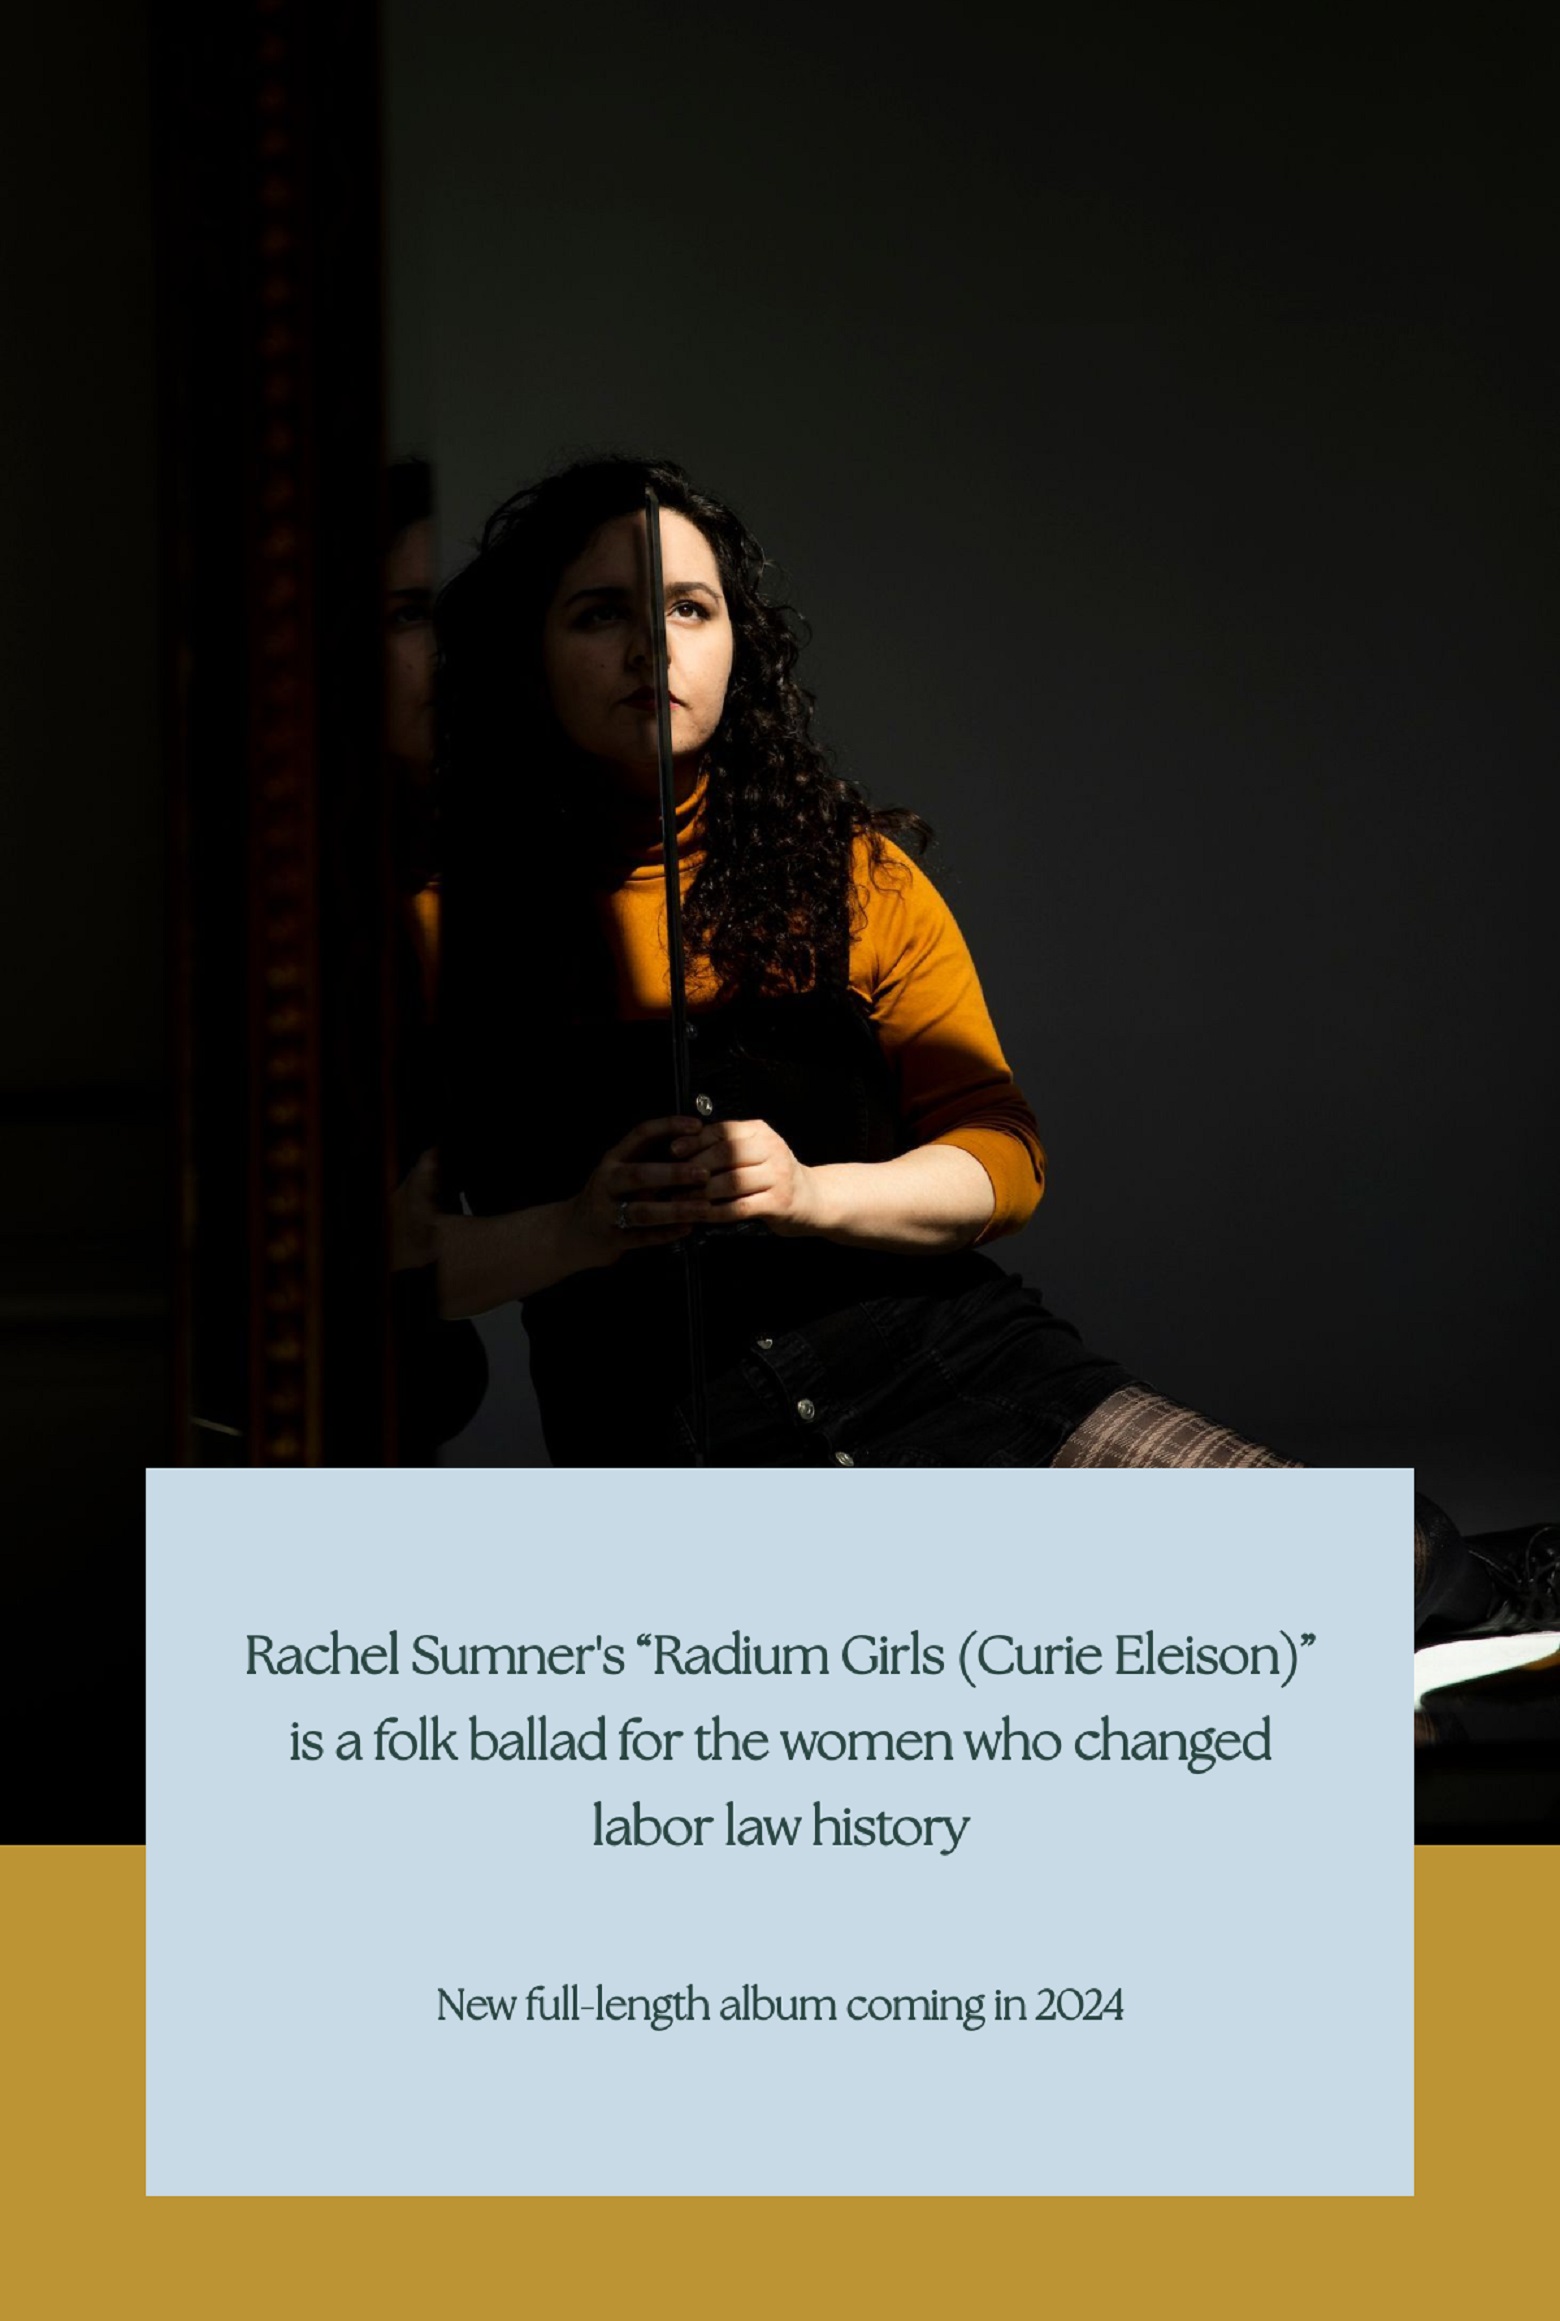 Rachel Sumner's “Radium Girls (Curie Eleison)” is a folk ballad for the women who changed labor law history